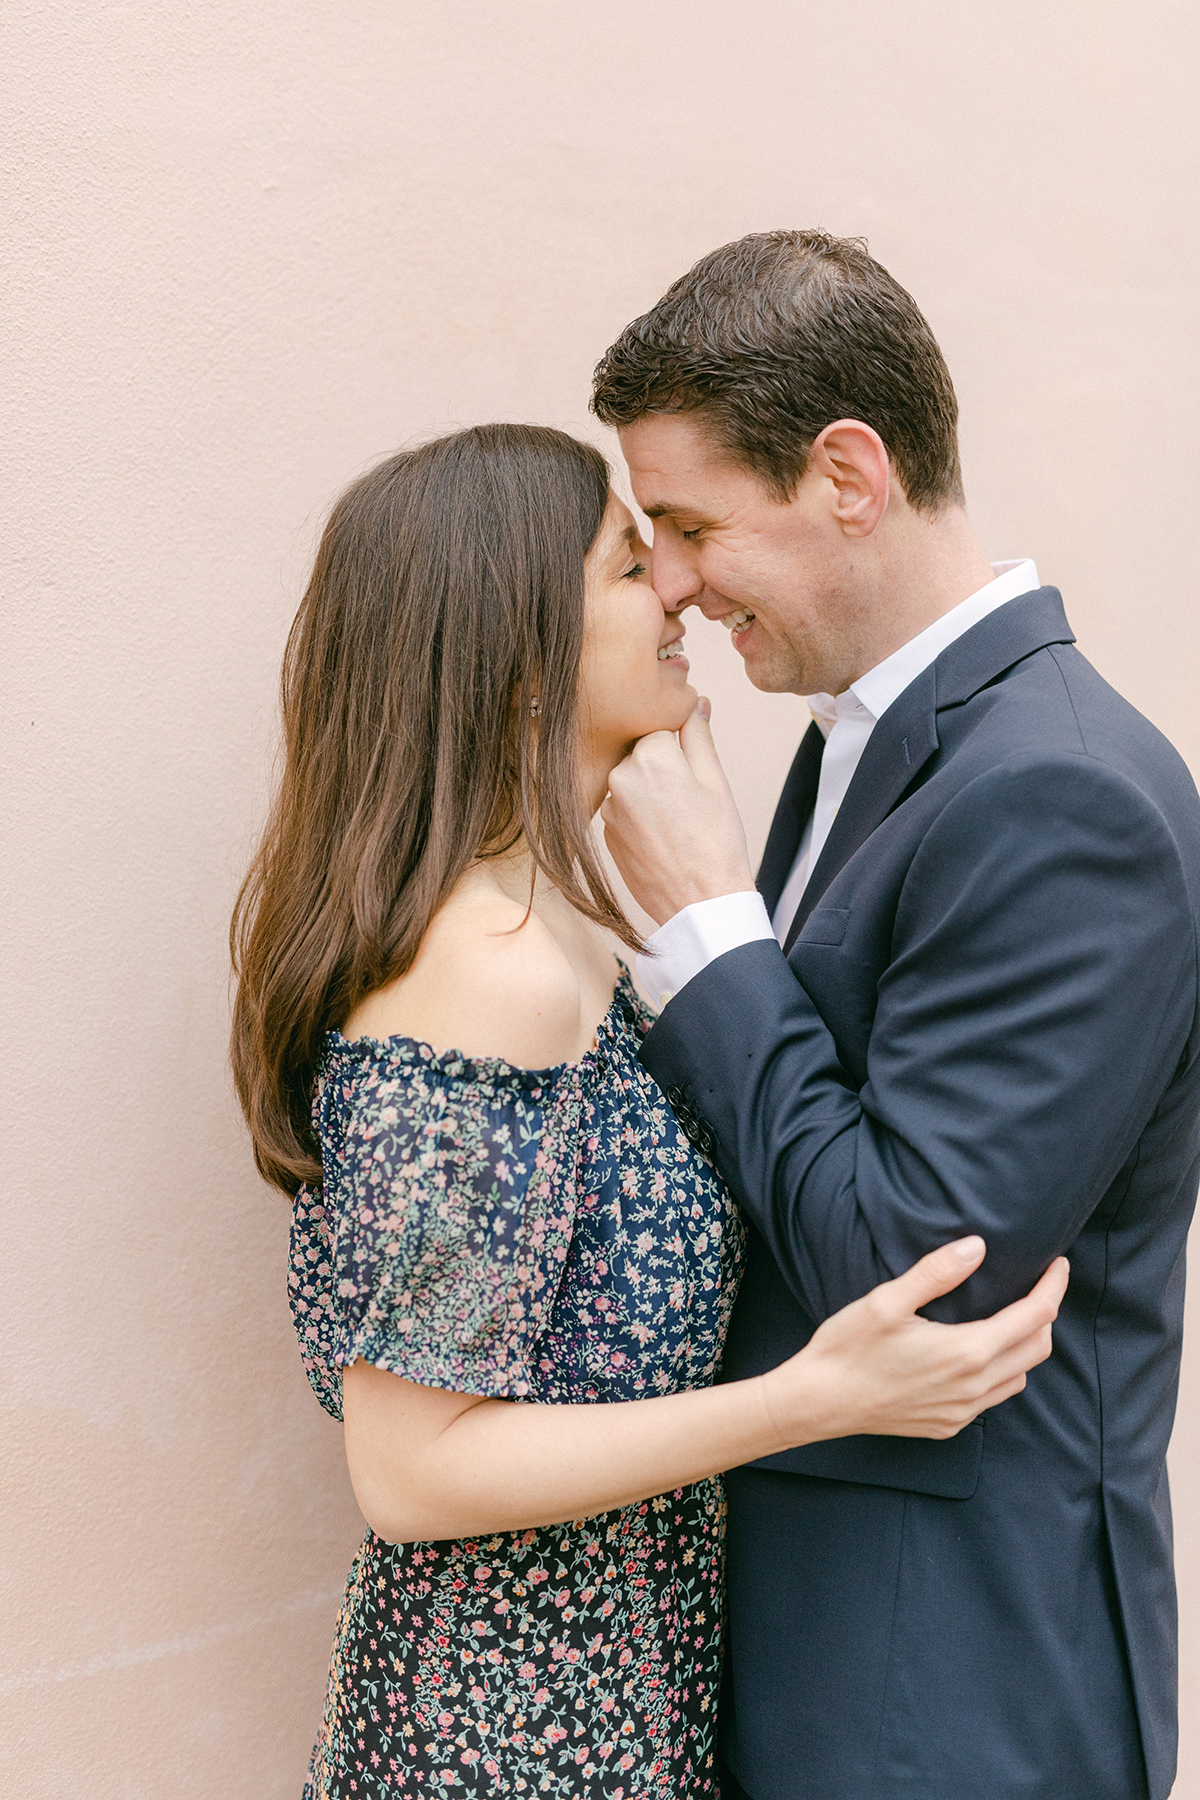 Engagement session in downtown Charleston against a pink wall